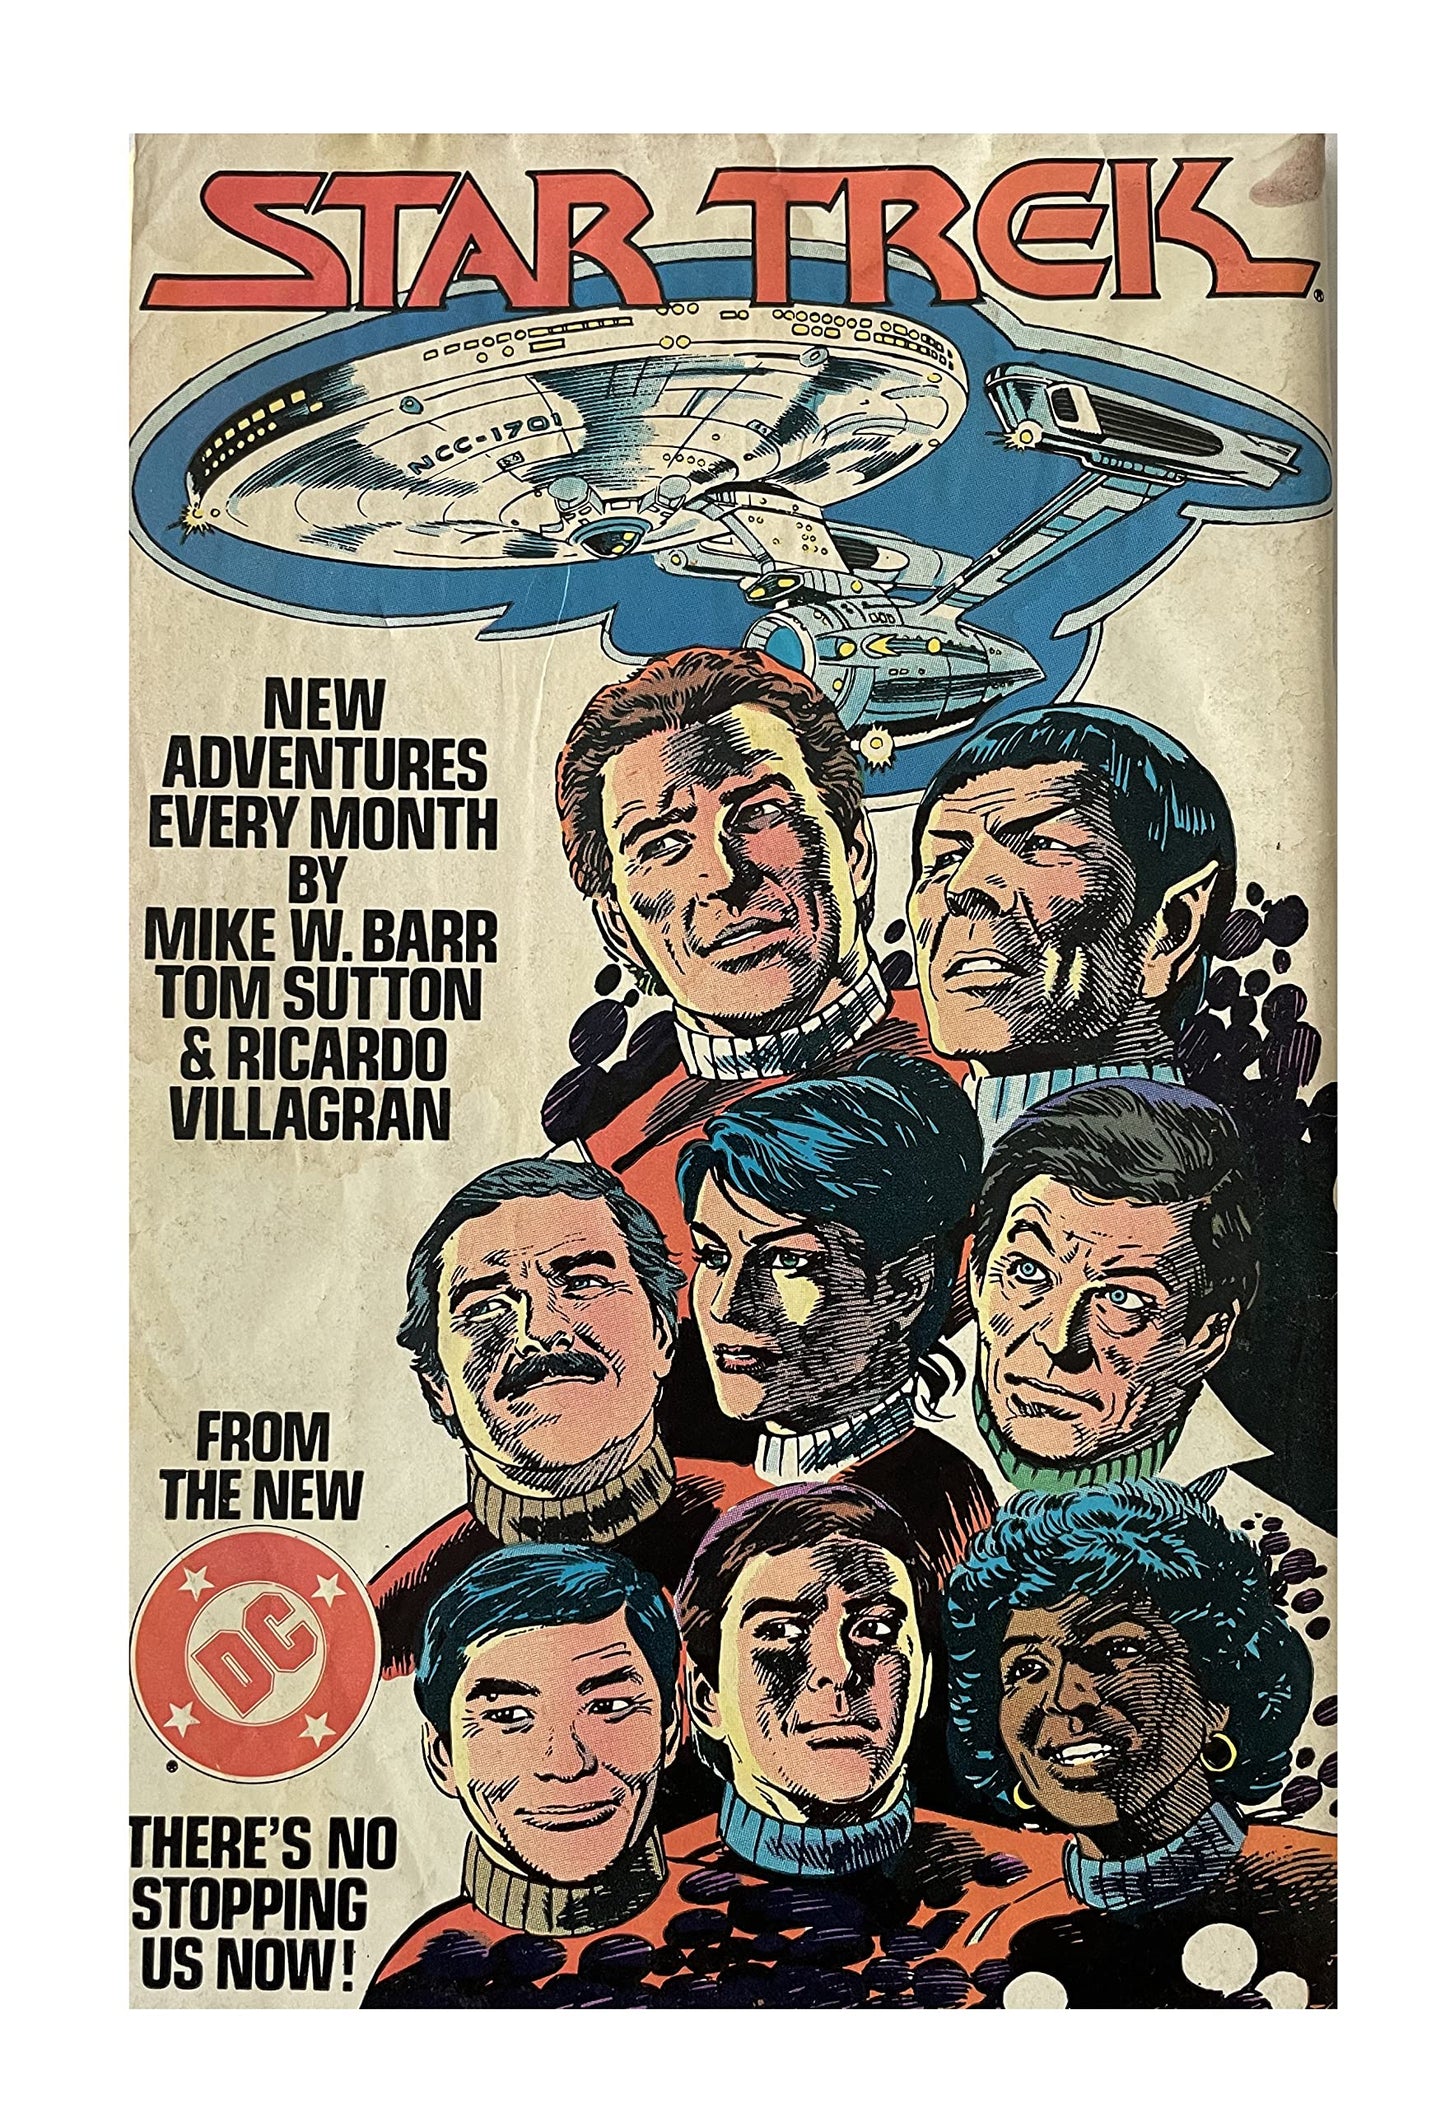 Vintage 1984 DC Comics Movie Special Star Trek III The Search For Spock Movie Adaptation Comic Book - Former Comic Book Shop Stock